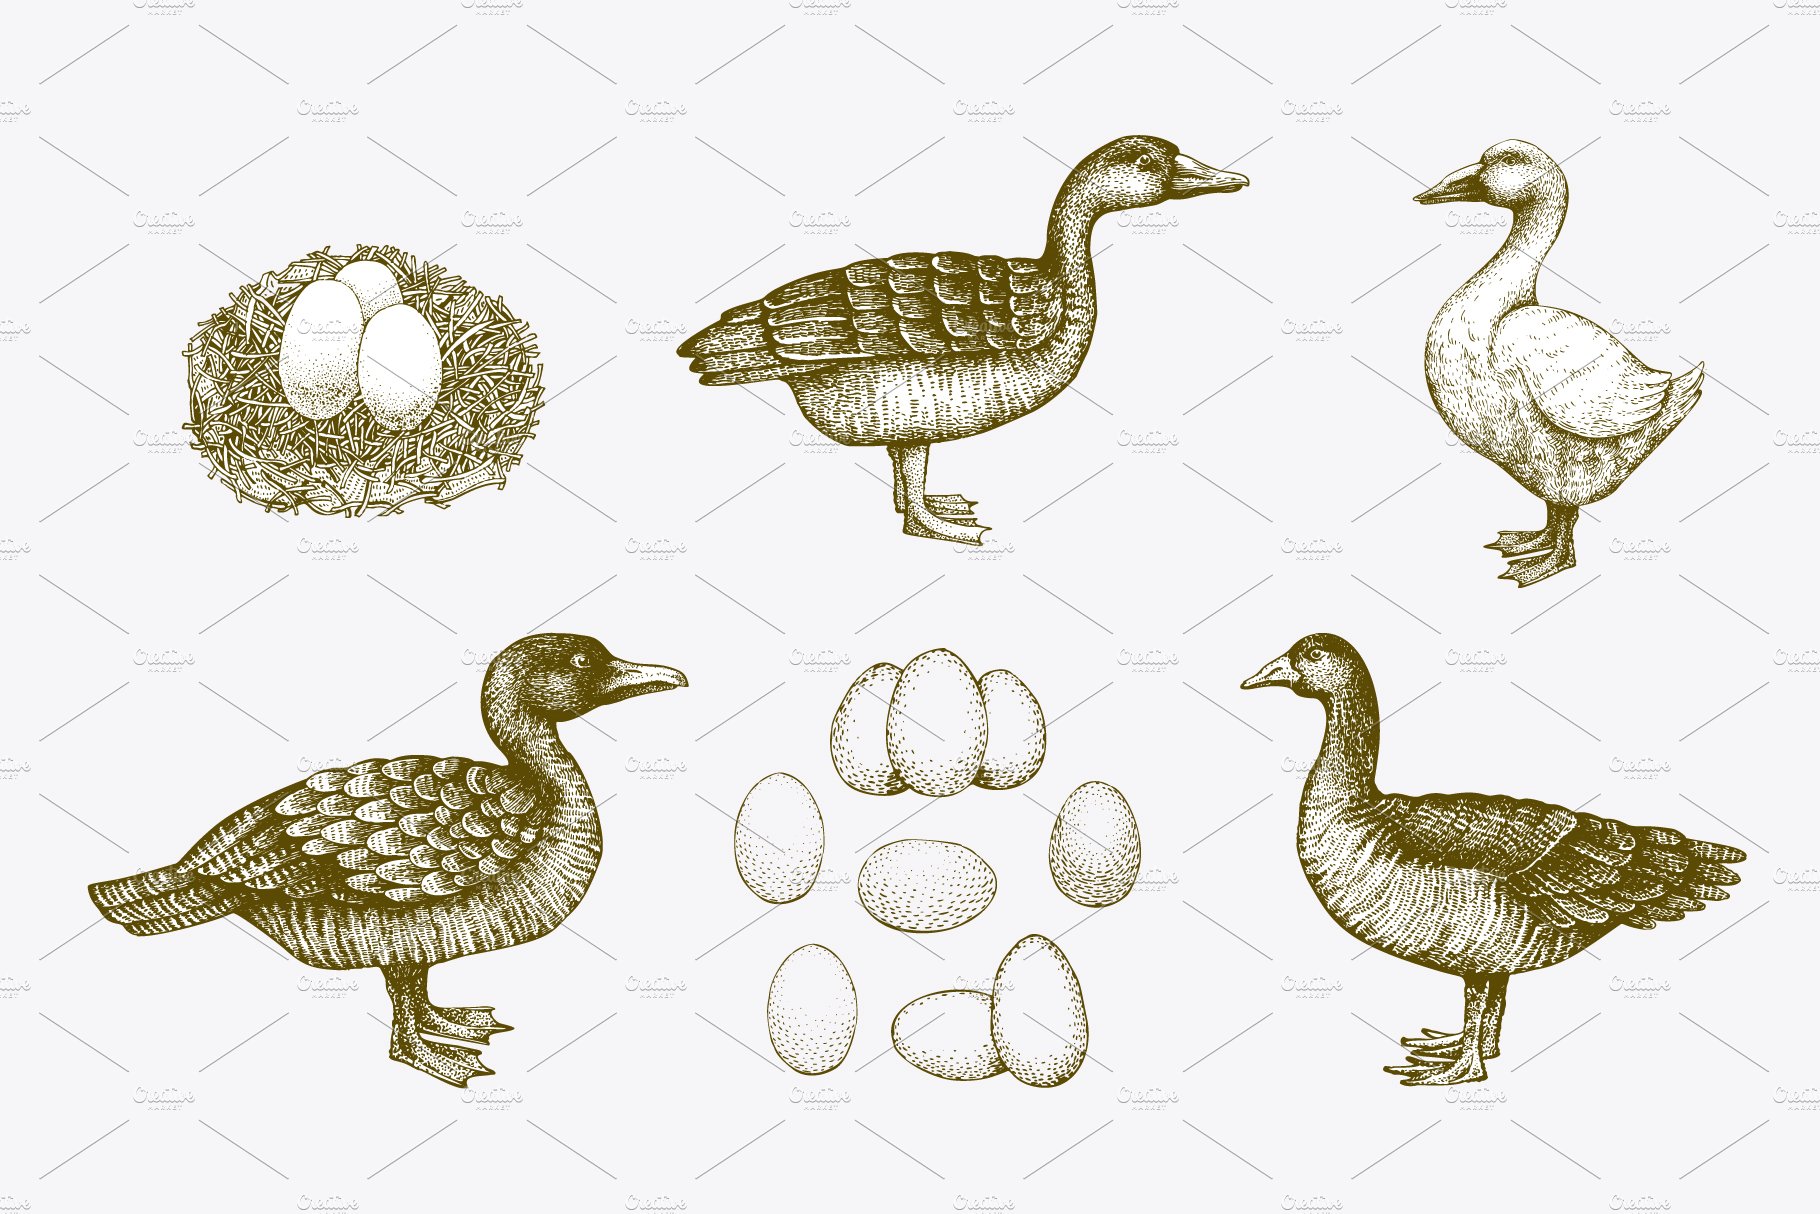 Cool illustration with farm birds and eggs.